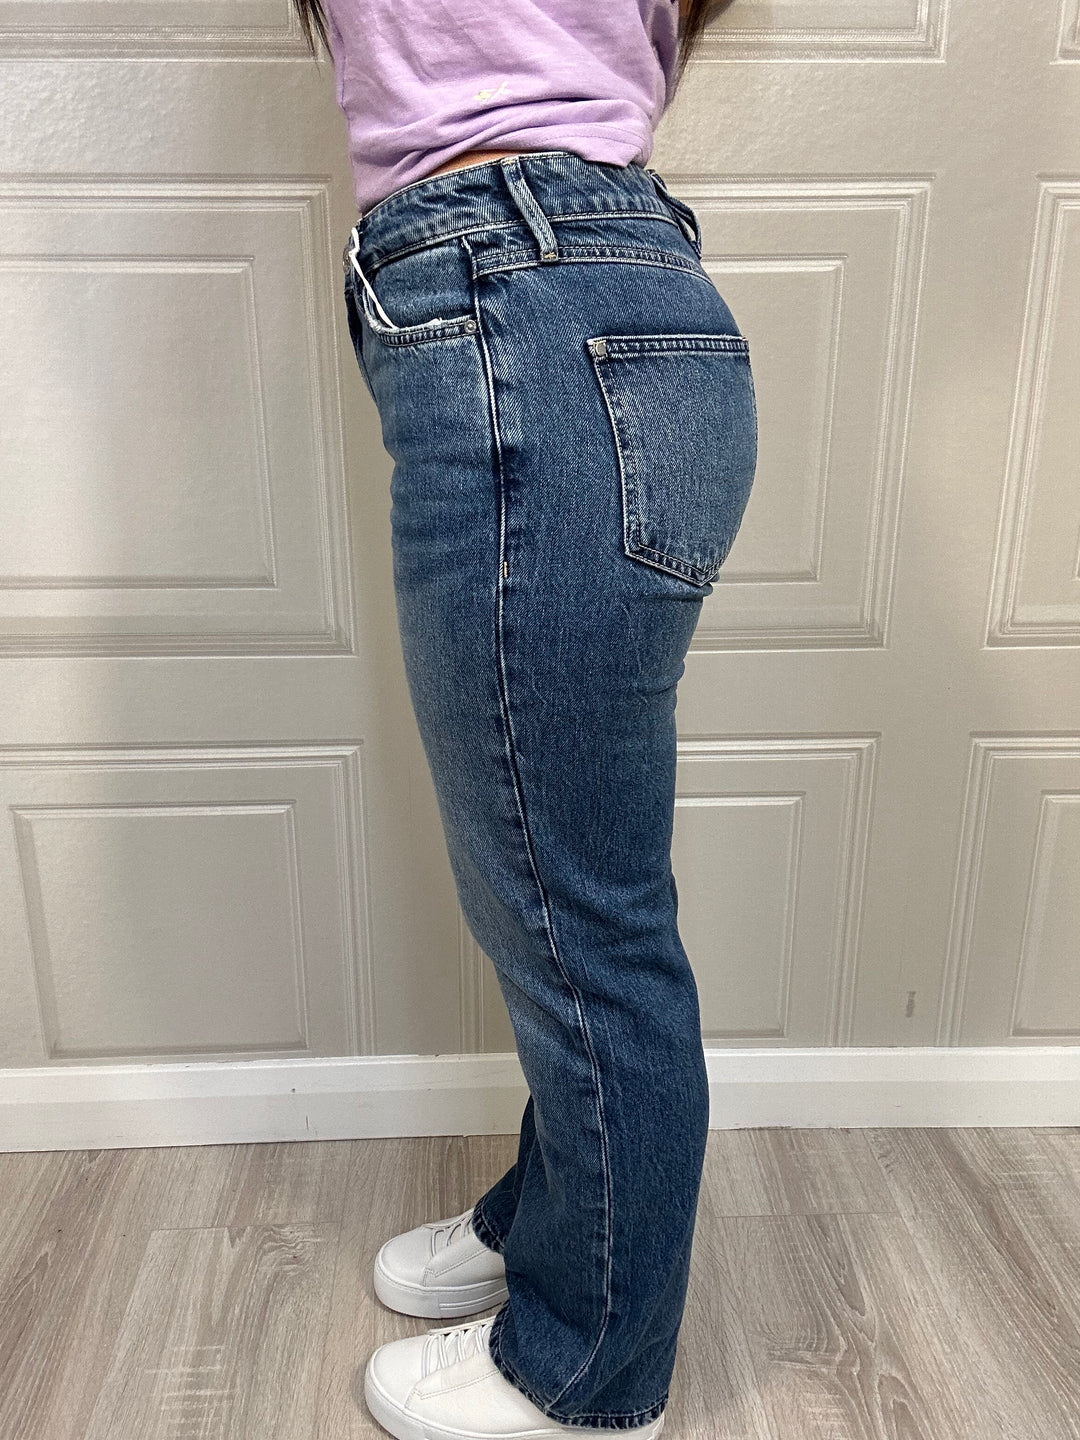 Guess 1981 Straight Denim Jeans